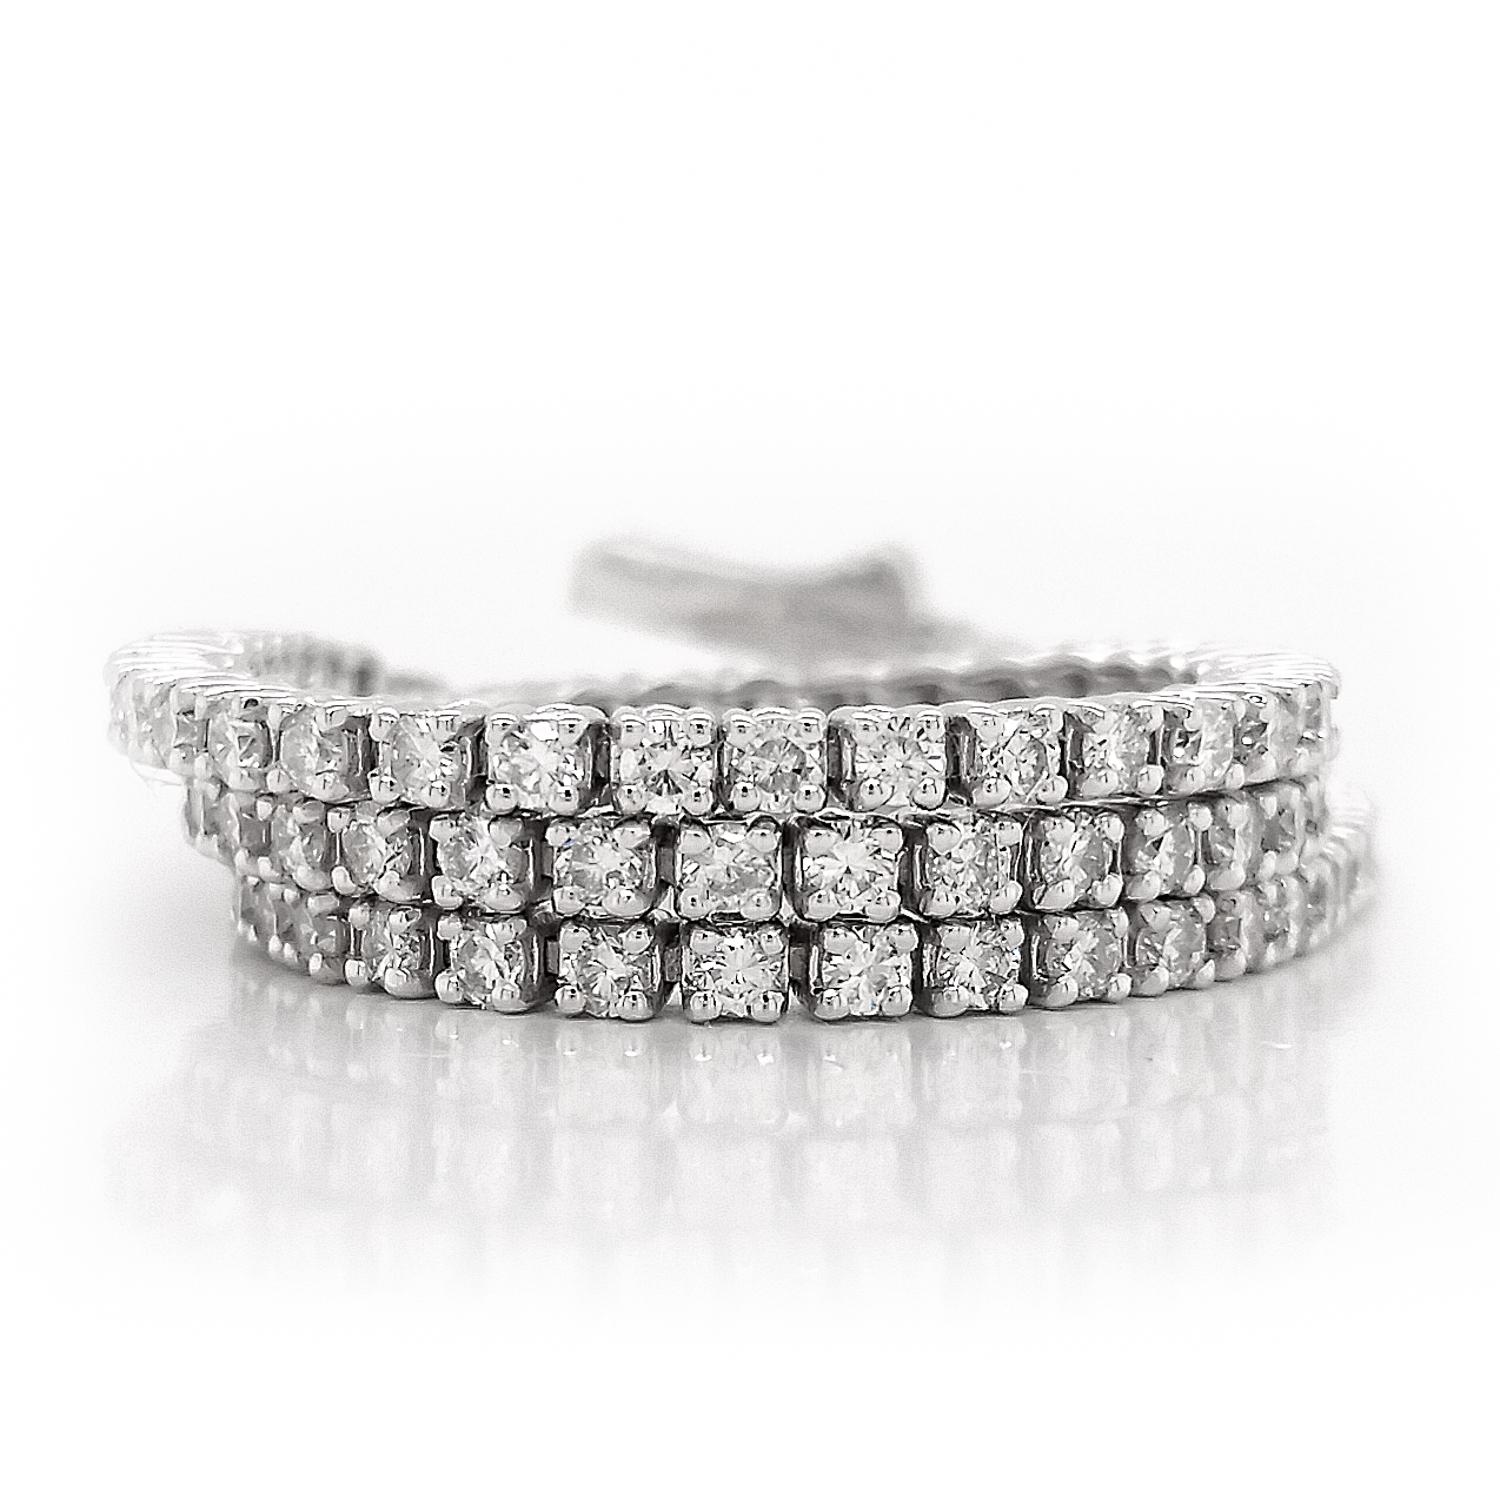 FOR U.S. BUYERS NO VAT 

This classic and elegant 14kt white gold tennis bracelet showcases 100 endlessly sparkling diamonds, totaling 1.45carat. This bracelet will give your favorite outfits unforgettable sparkle. 
For more information, please